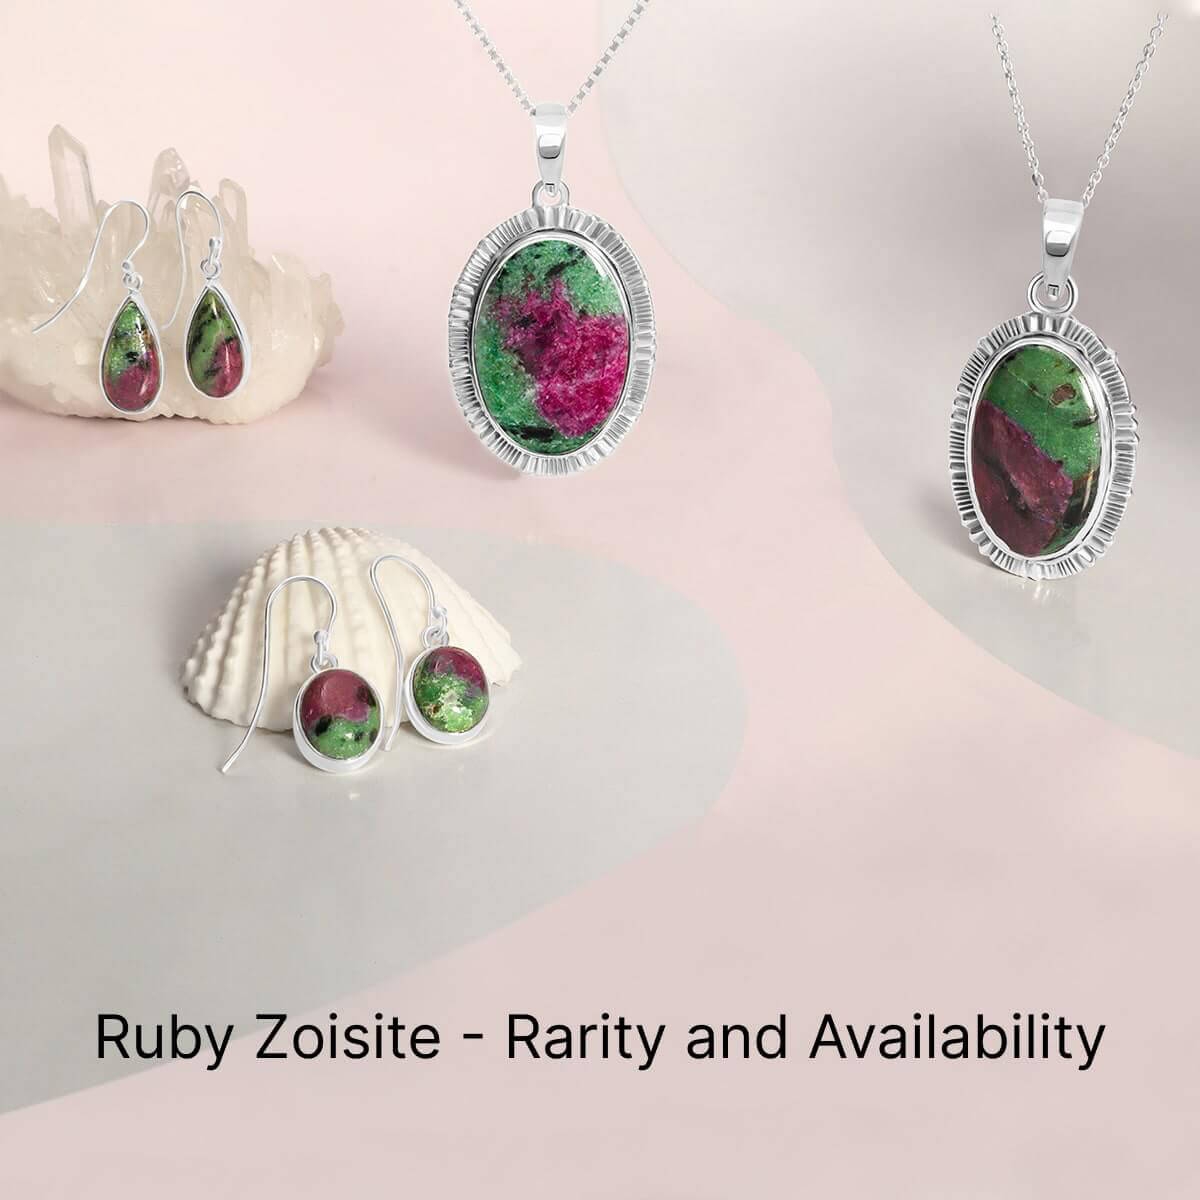 What is the quantity of ruby zoisite available and is it considered a rare gemstone?